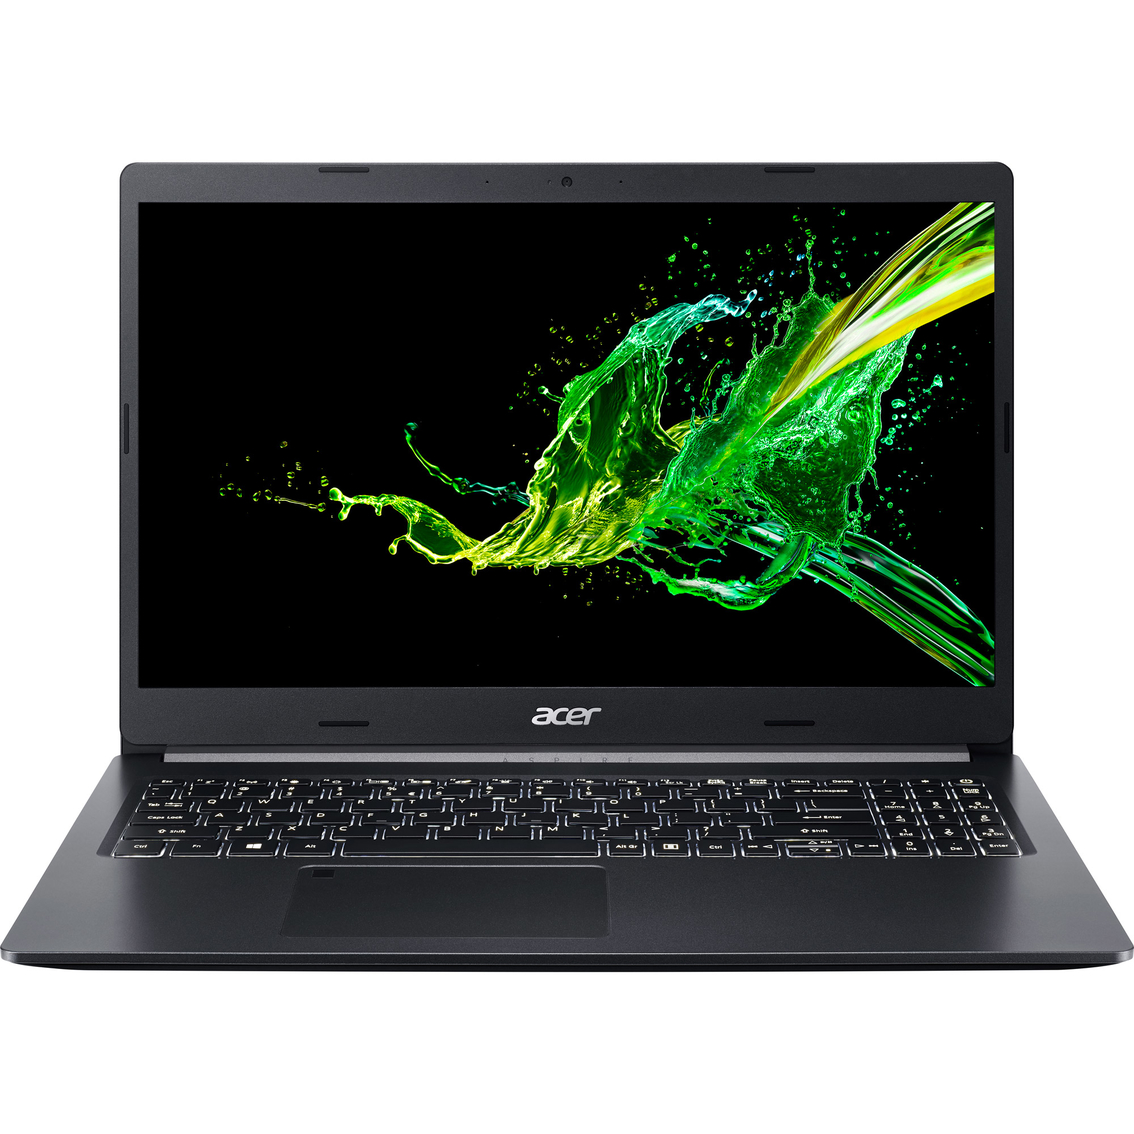 Acer Aspire 5 15.6 in. Intel Core i5 1GHz 8GB RAM 512GB SSD Touchscreen Notebook - Image 1 of 4